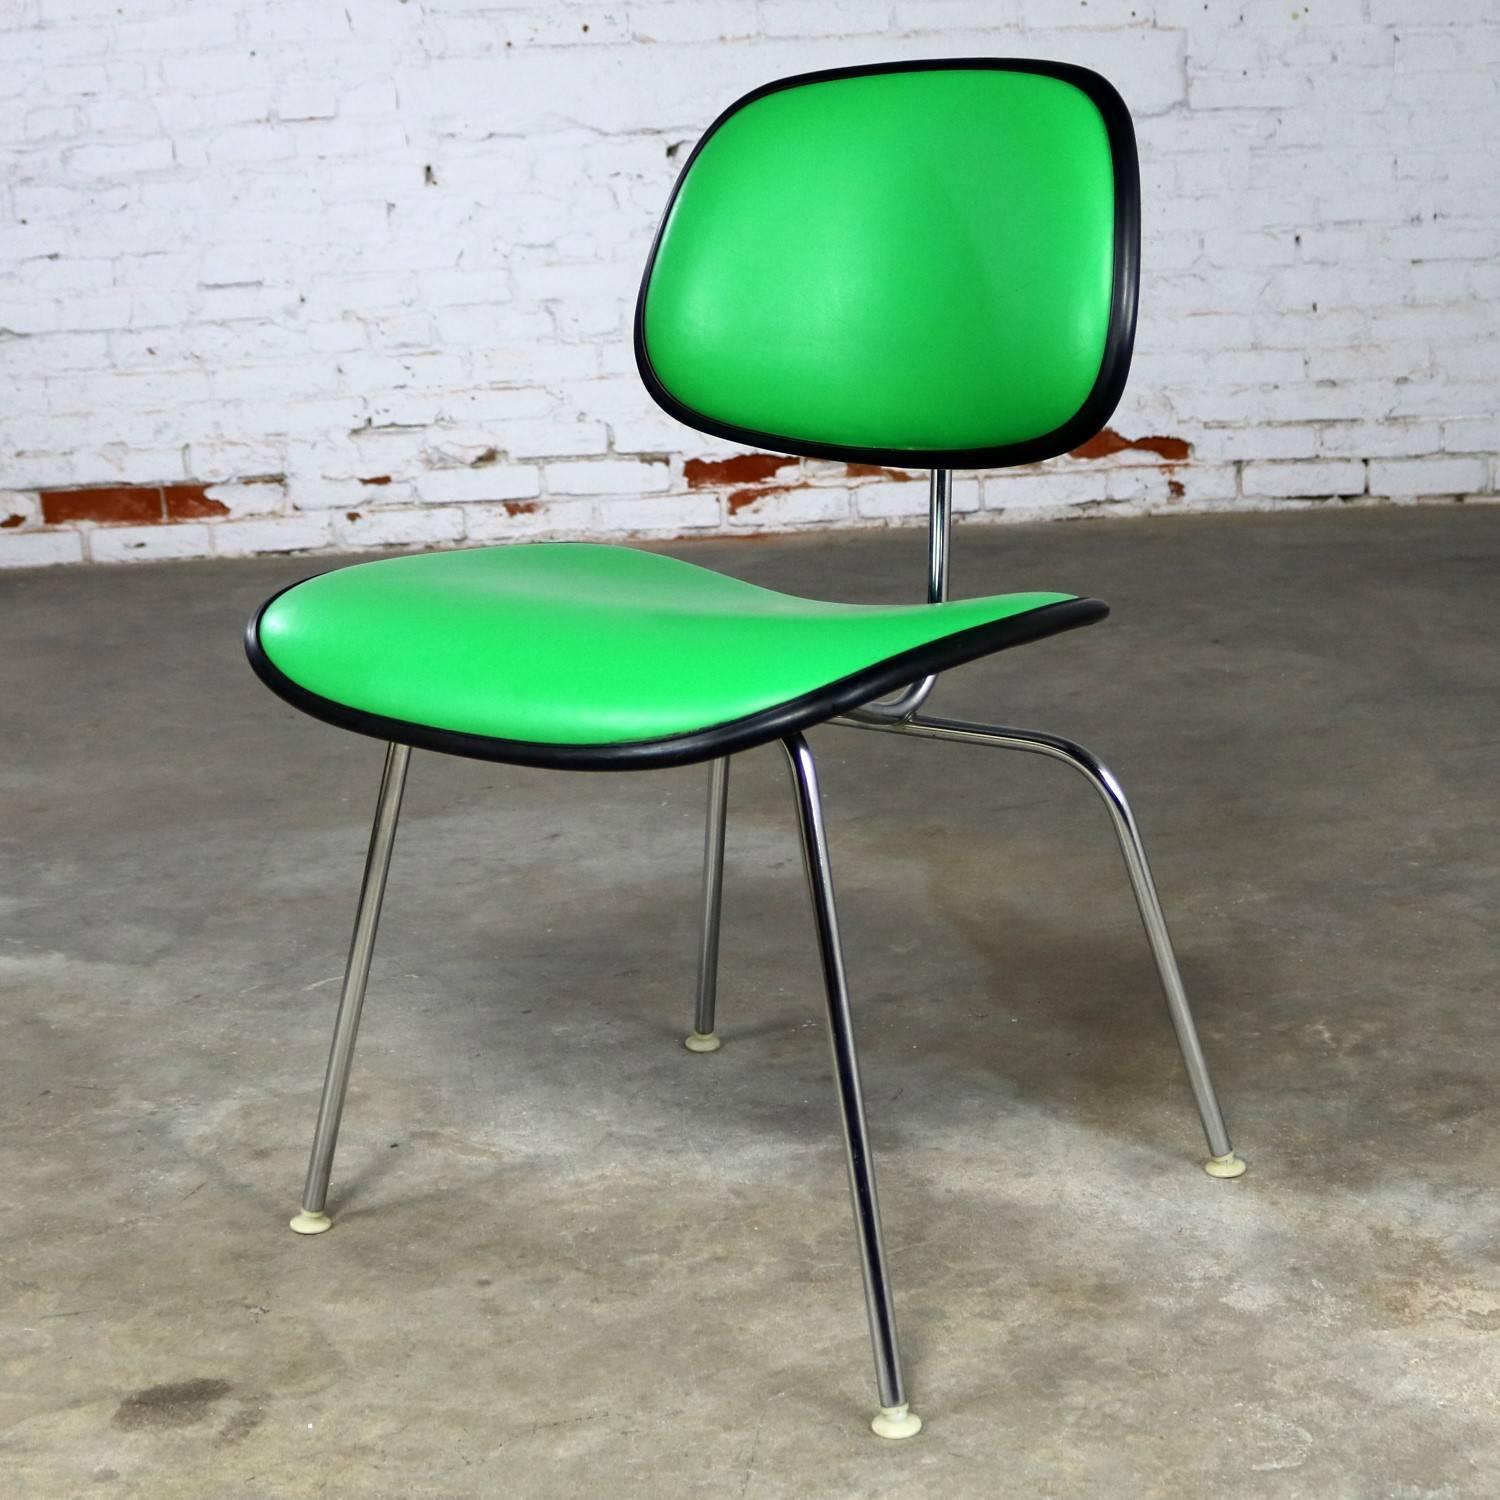 Handsome and Classic EC-127 padded DCM chair, or dining chair metal, by Charles Eames for Herman Miller. This one is upholstered in Kelly green Naugahyde, black trim and black seat and back, with chrome legs. It is in exceptionally good vintage